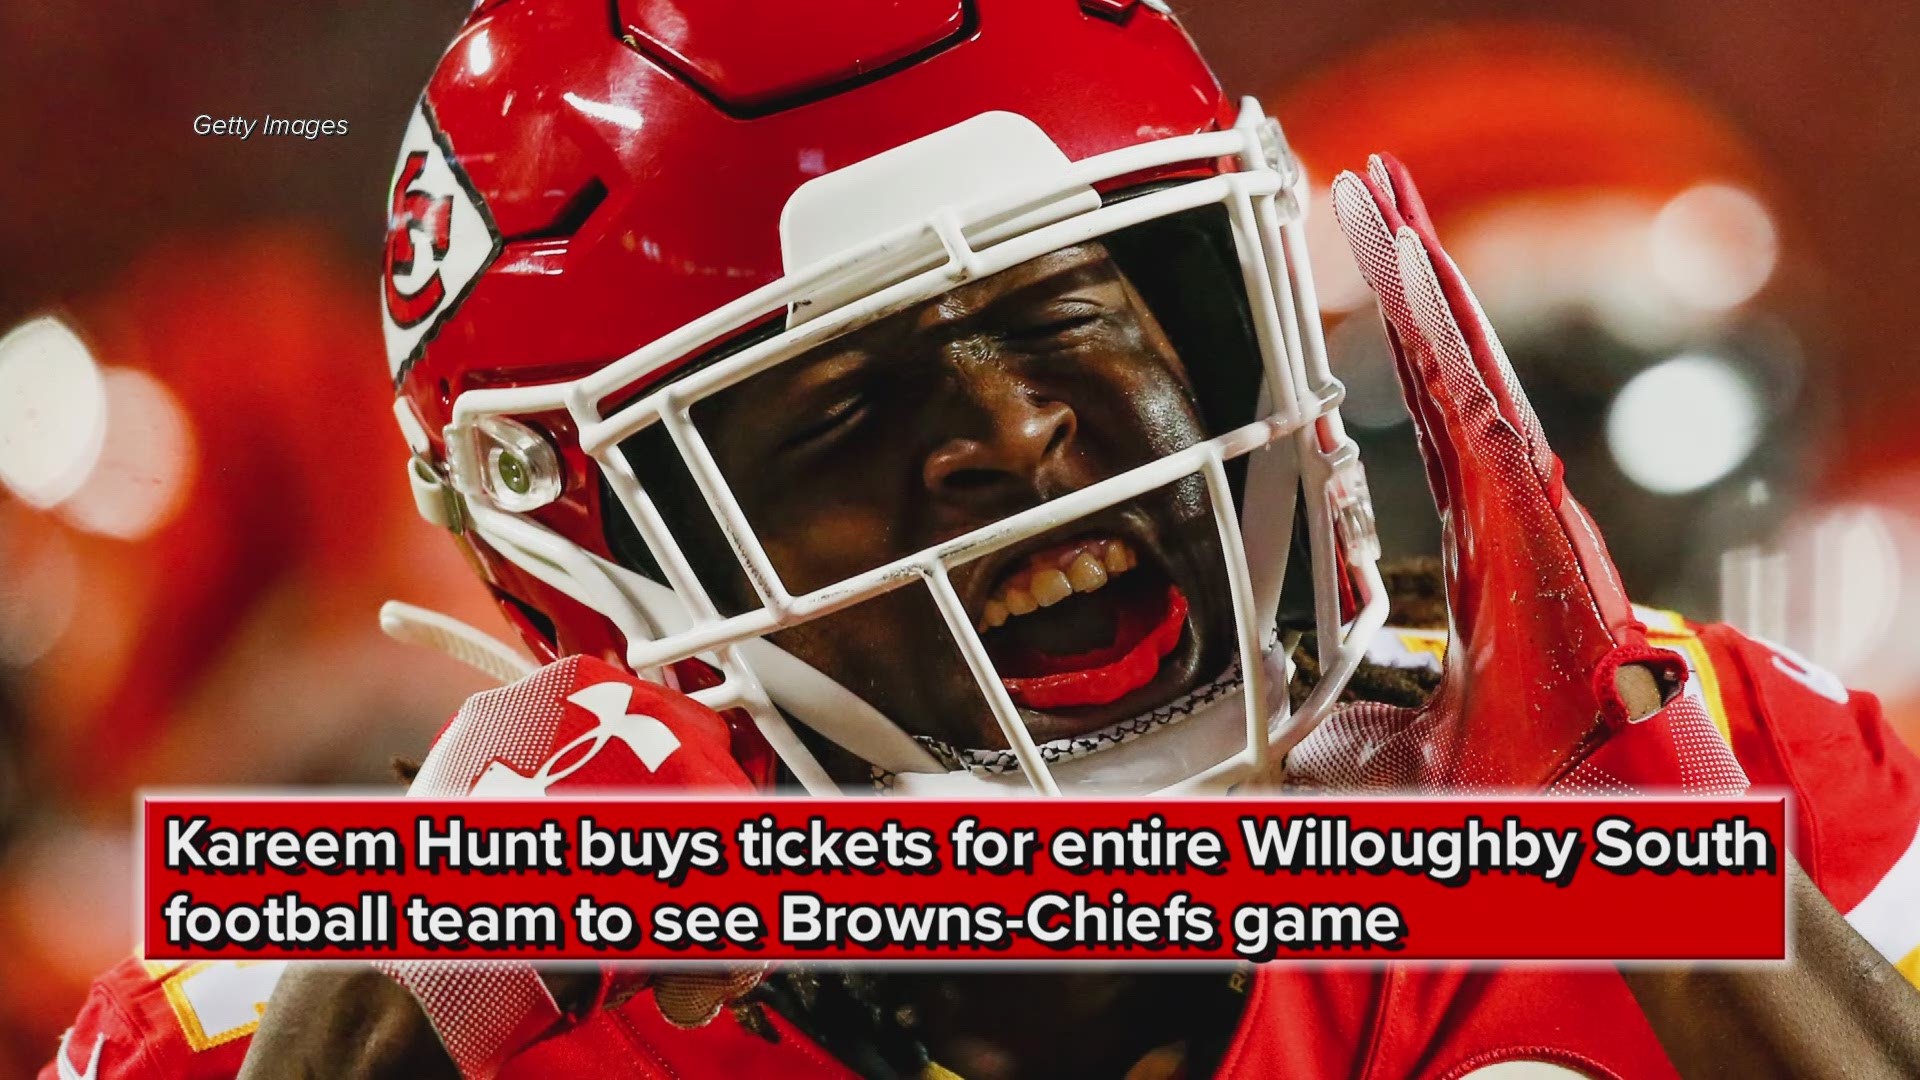 Kareem Hunt buys tickets for entire Willoughby South football team to see Browns-Chiefs game